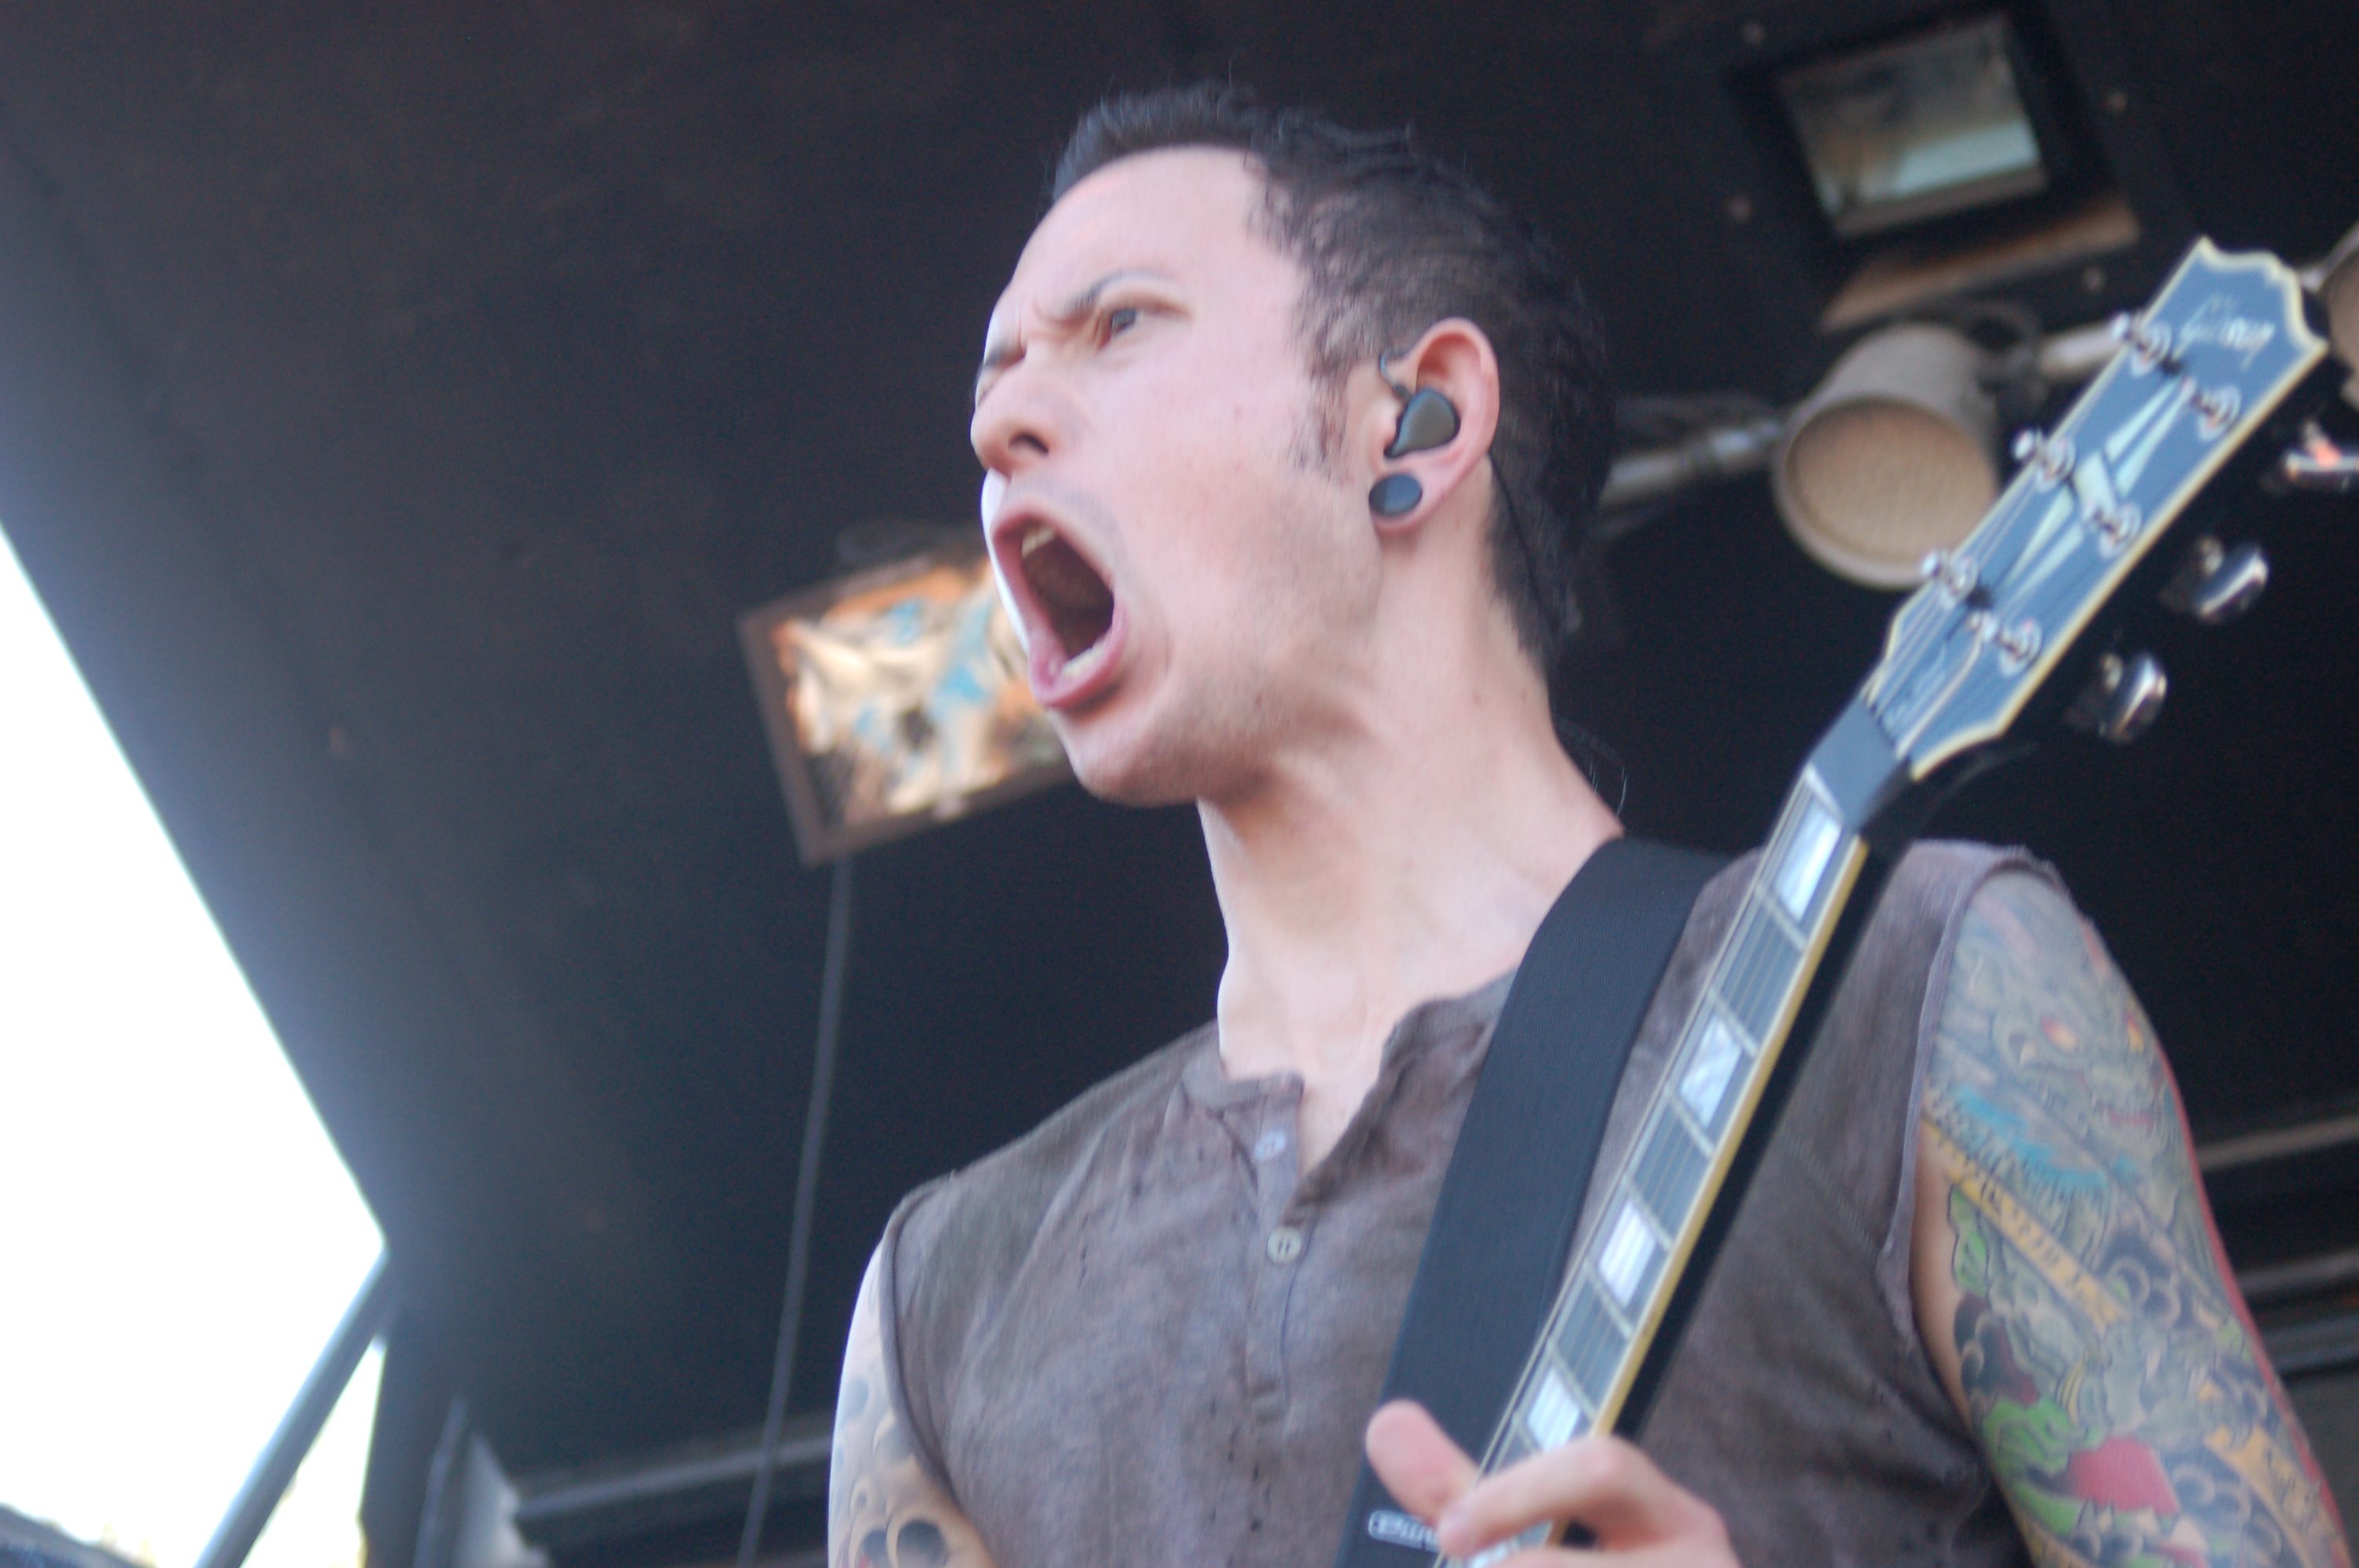 Trivium’s Matt Heafy Covers For Randy Blythe During Michigan Show After Testing Positive For Covid-19